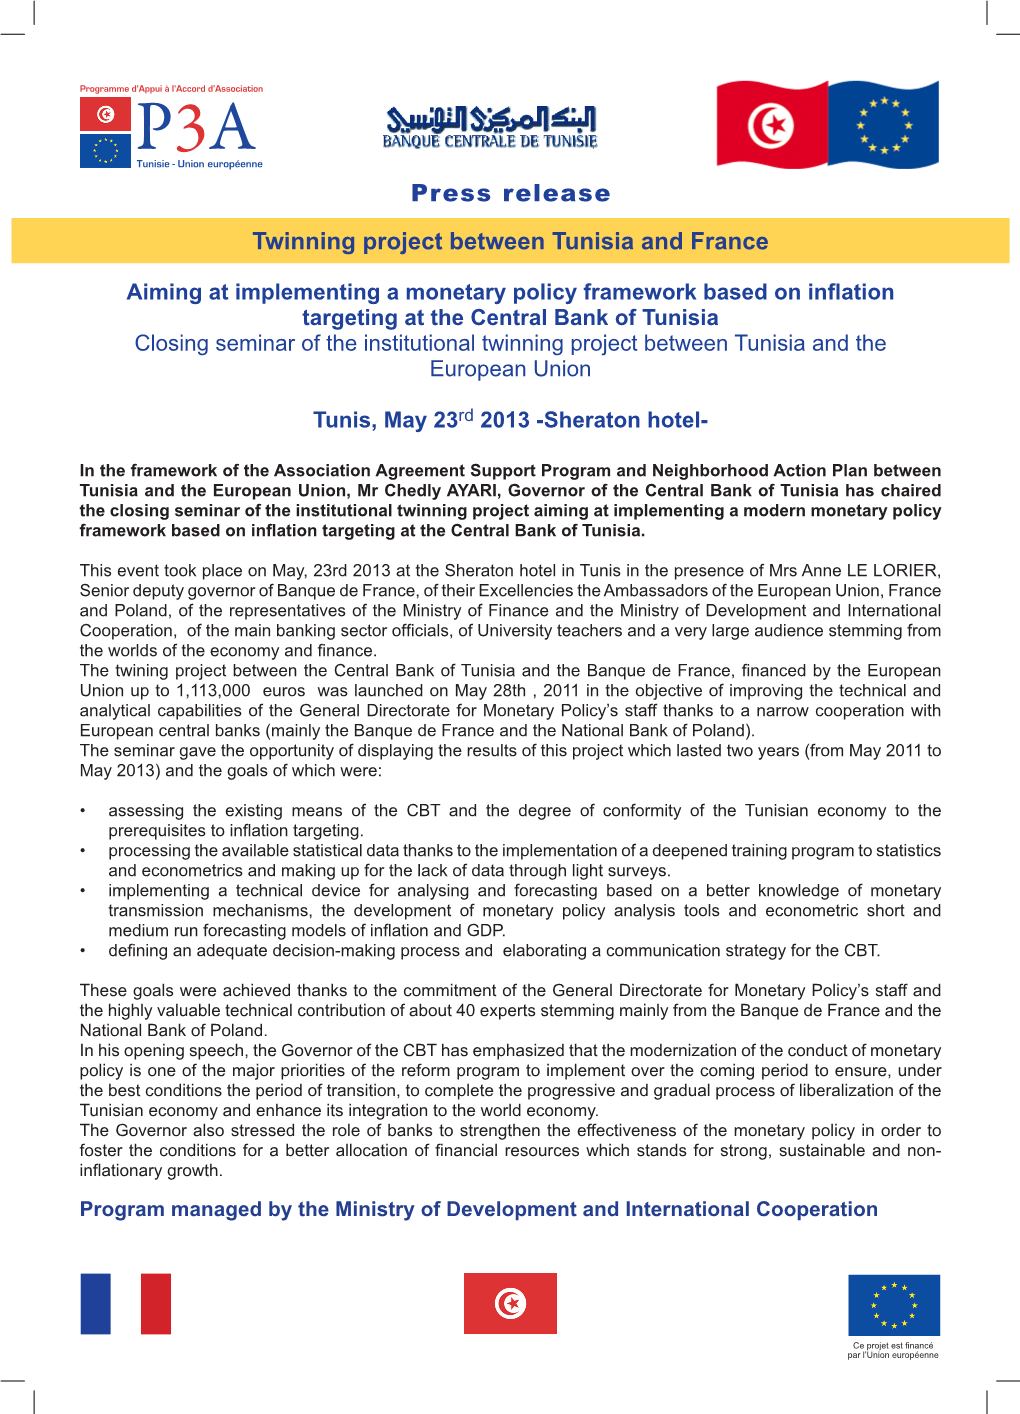 Press Release Twinning Project Between Tunisia and France